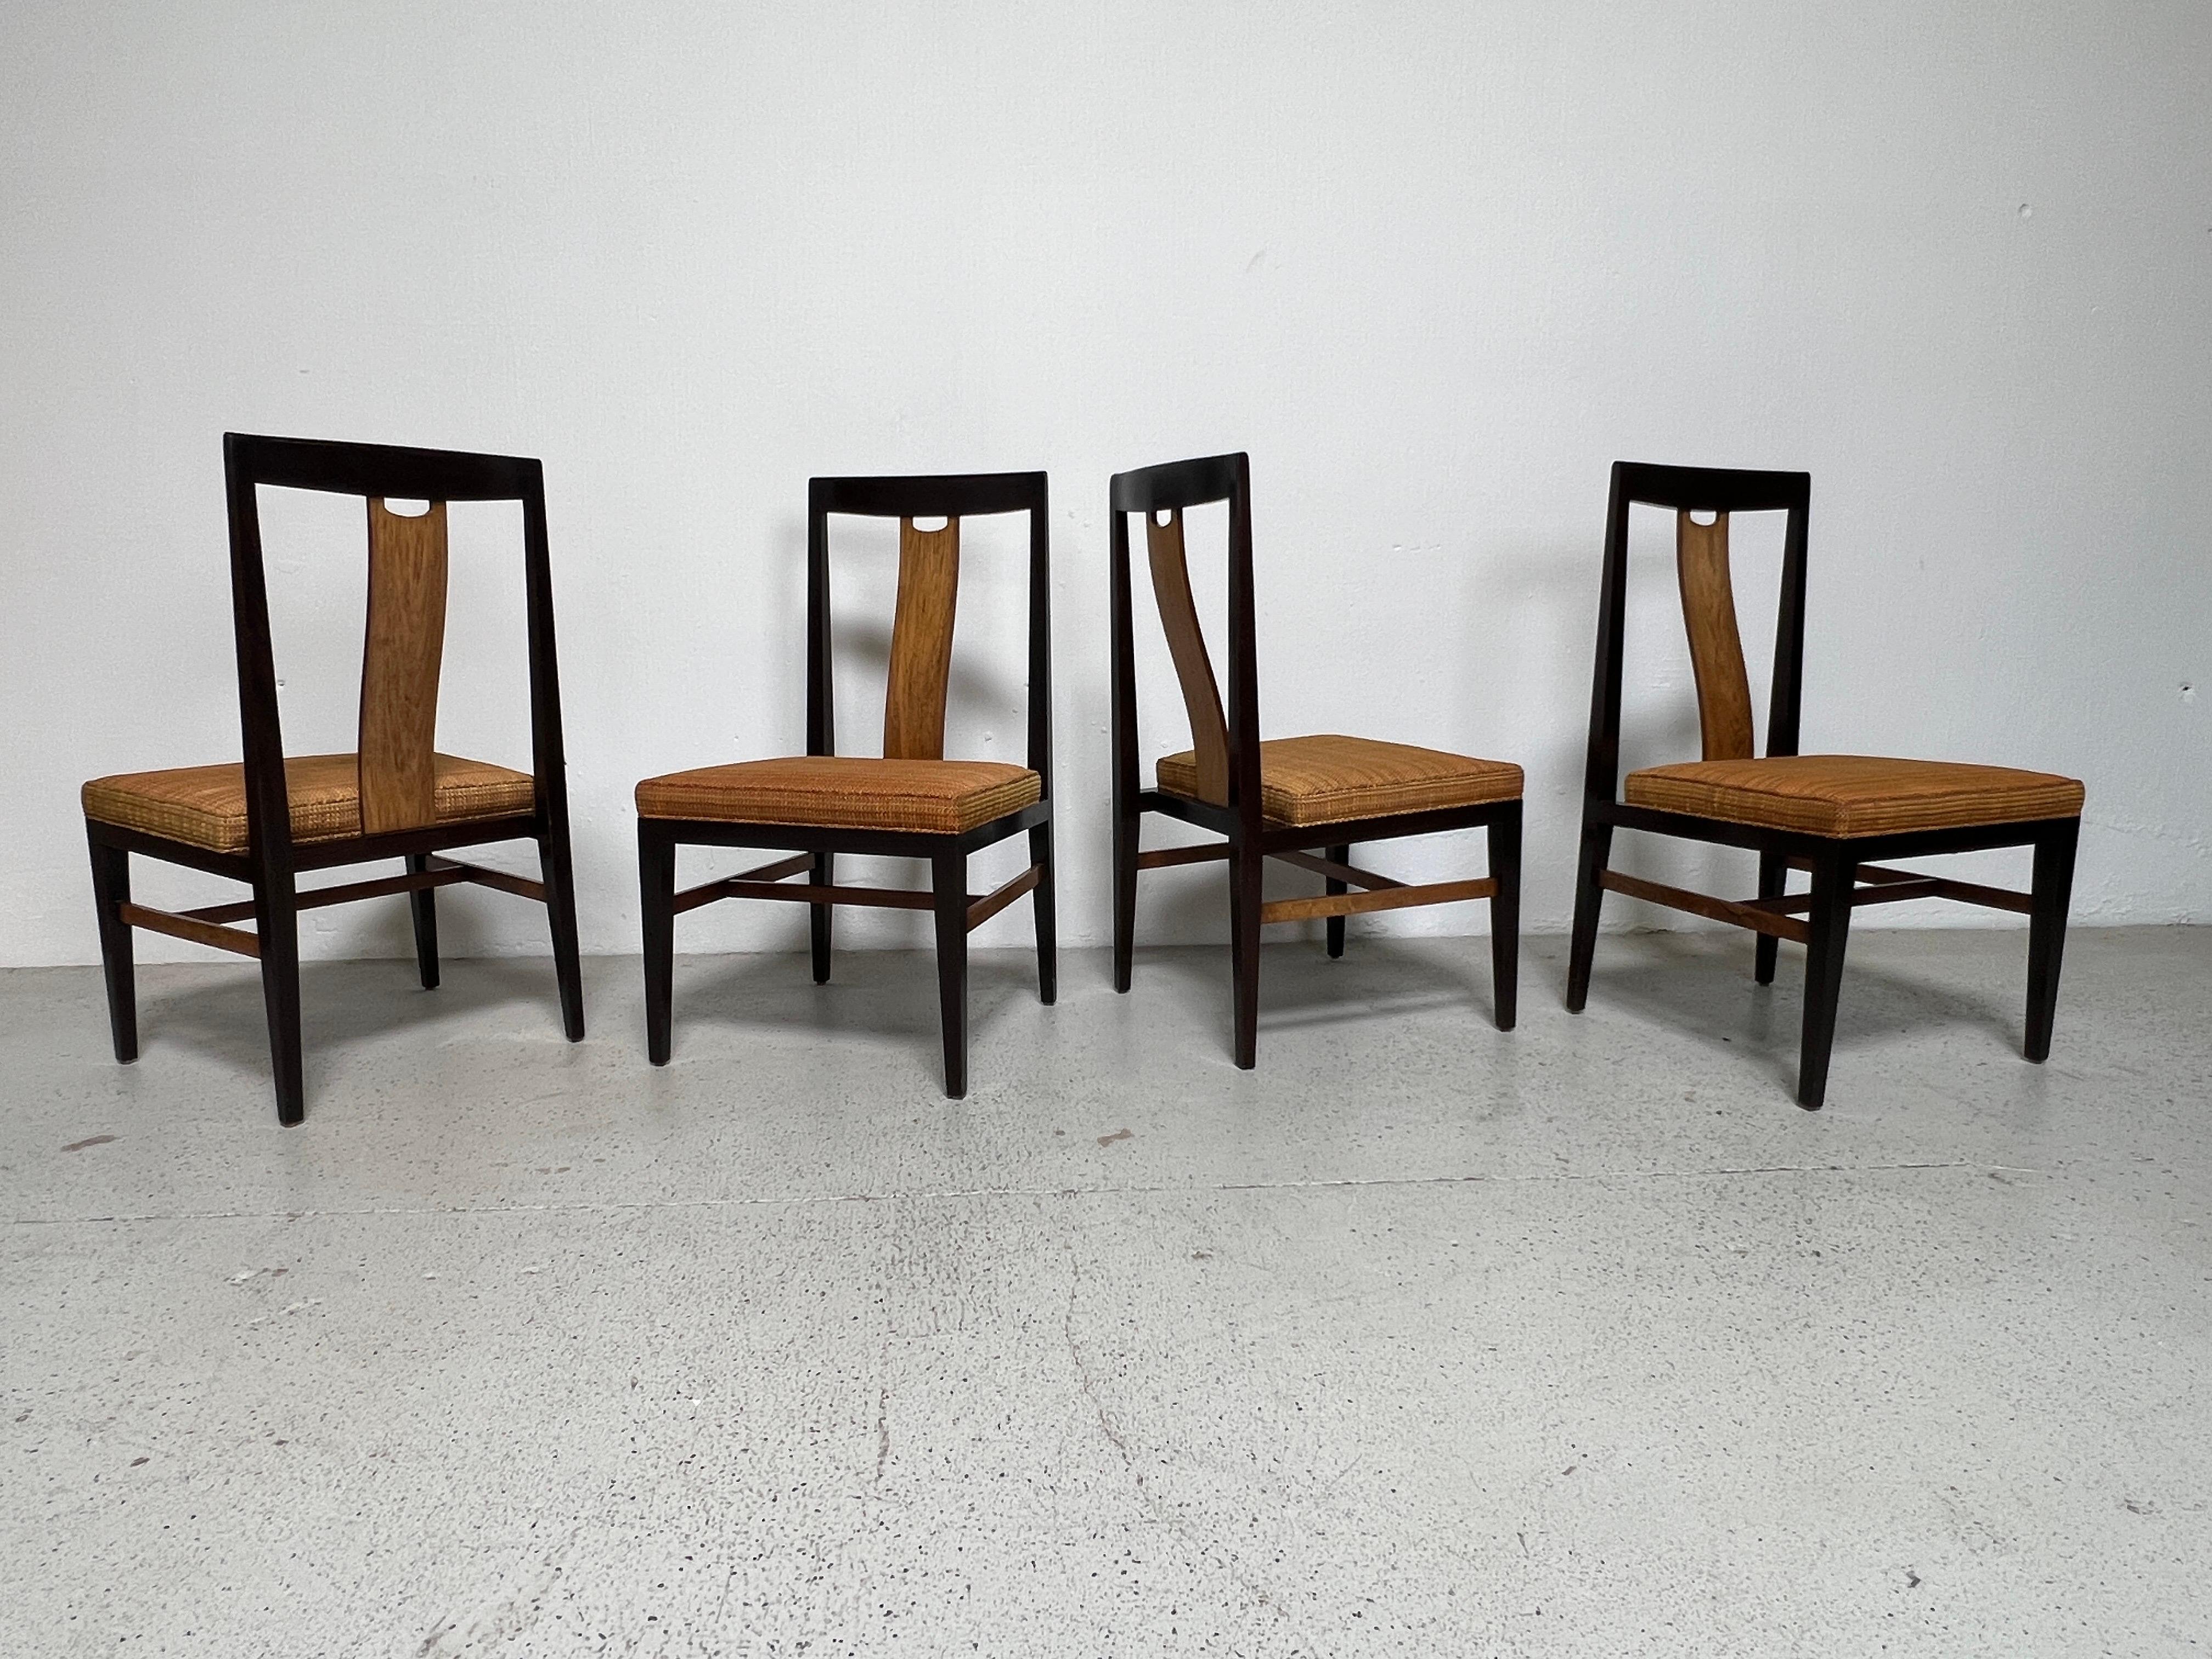 A rare set of four ash and rosewood dining / game chairs designed by Edward Wormley for Dunbar. Matching pair of archairs available separately.